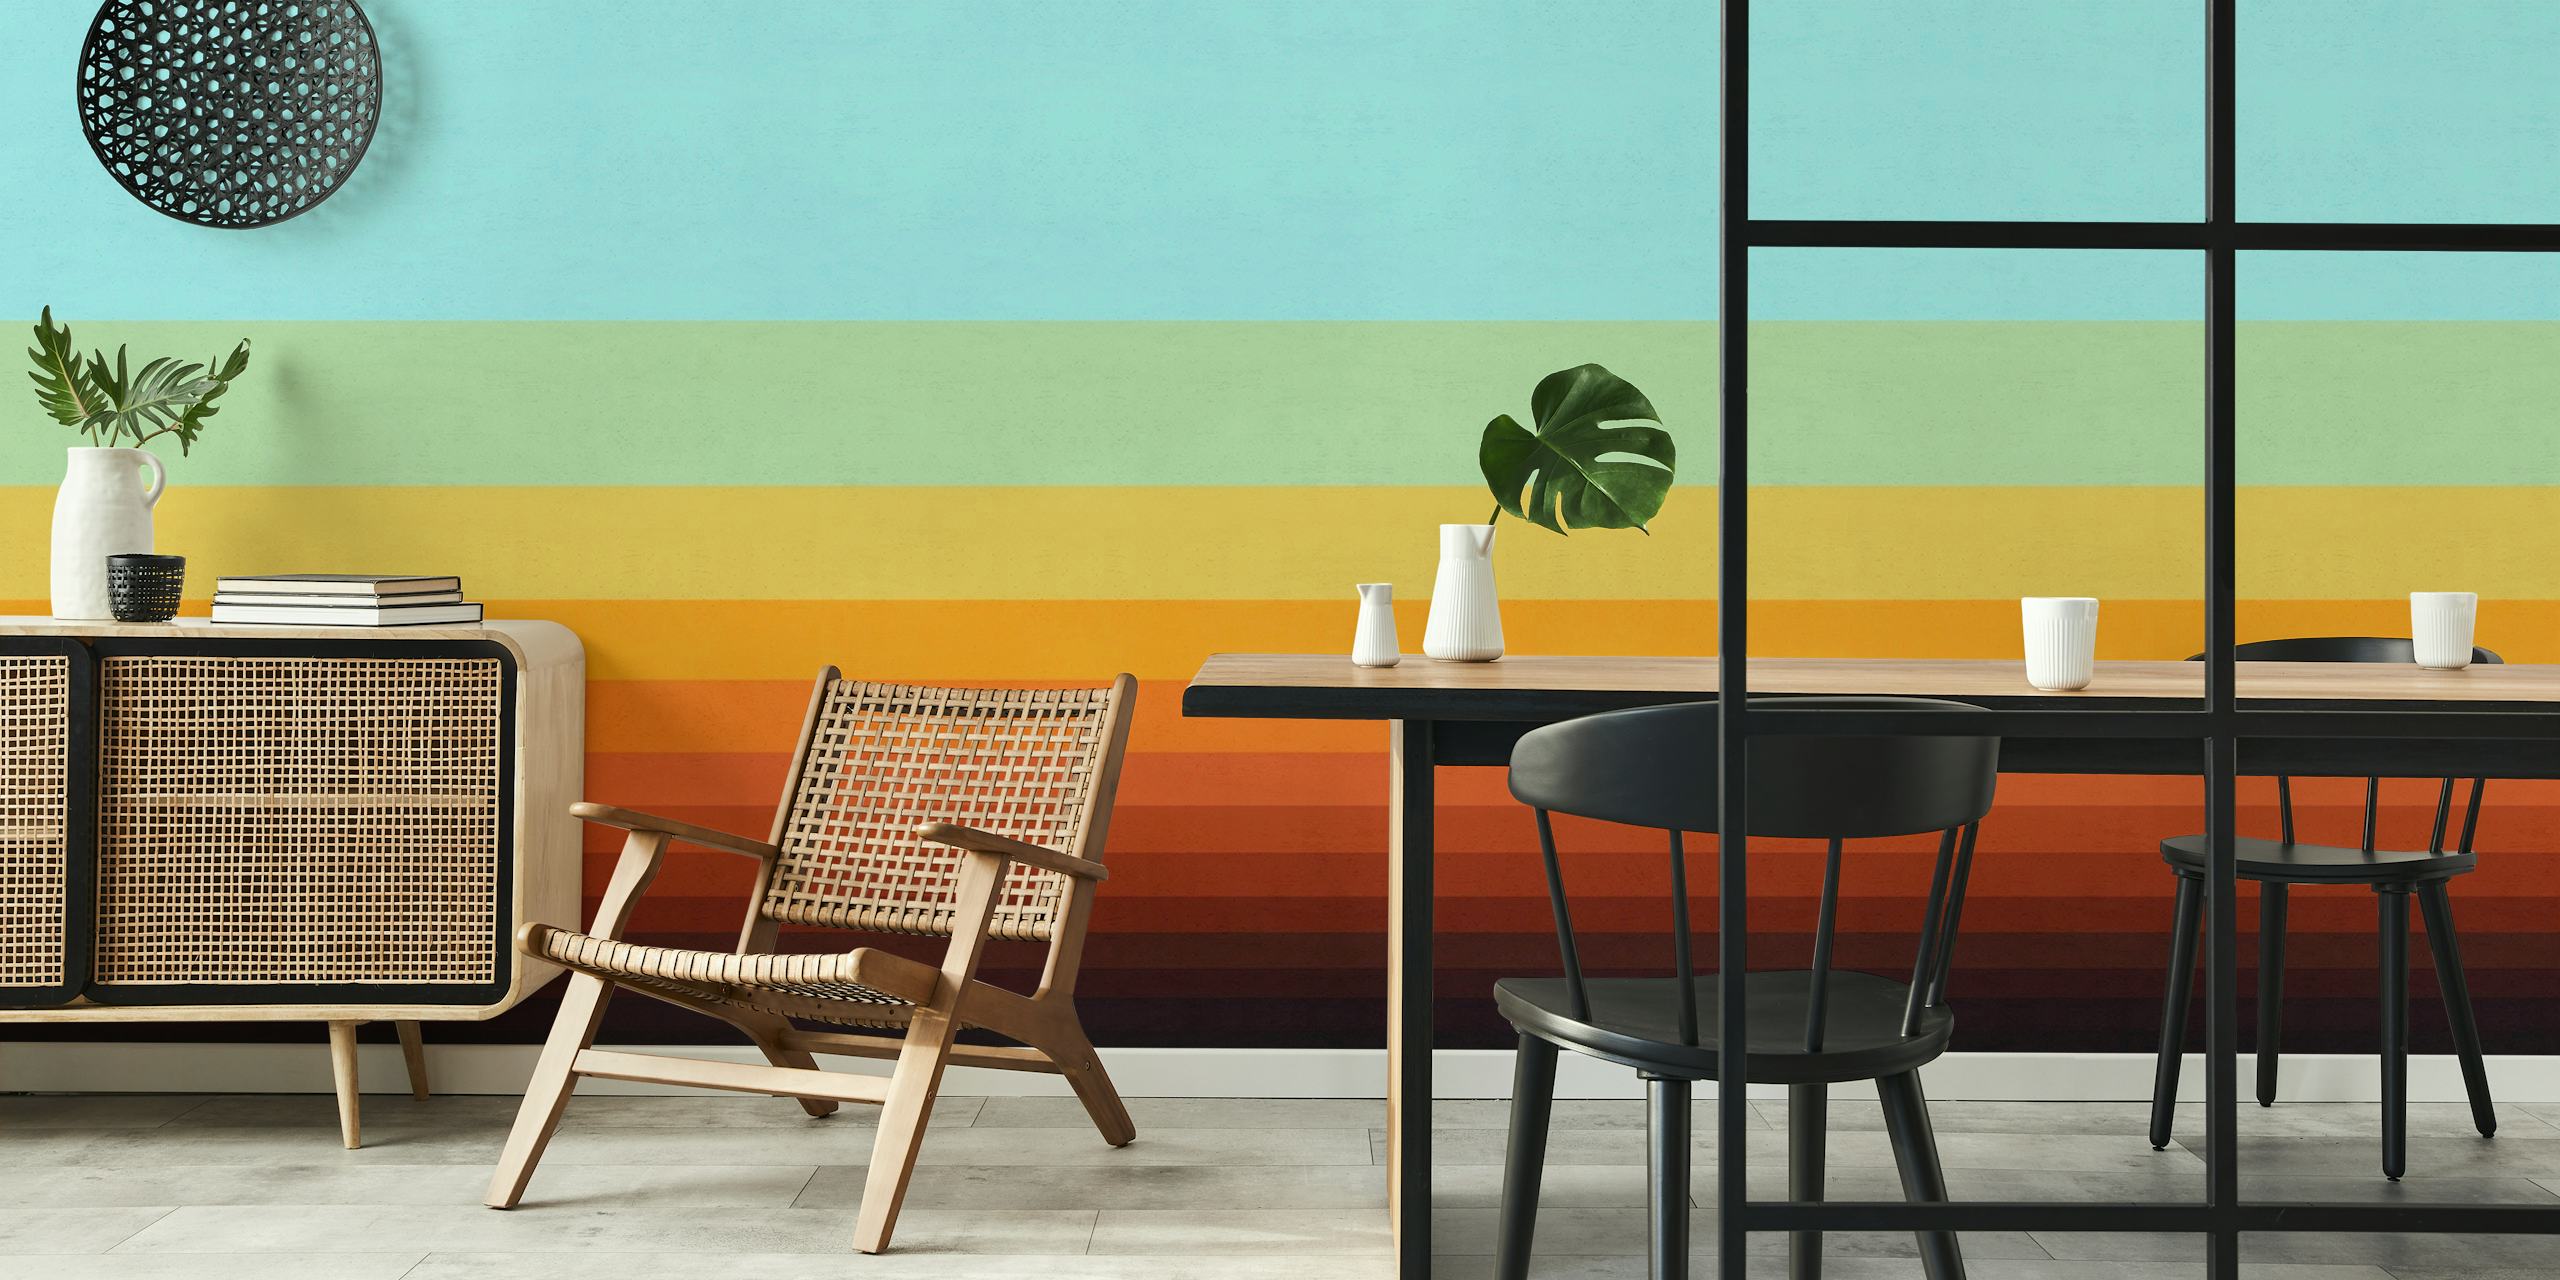 Abstract gradient landscape wall mural with horizontal stripes transitioning from warm orange to cool teal blue